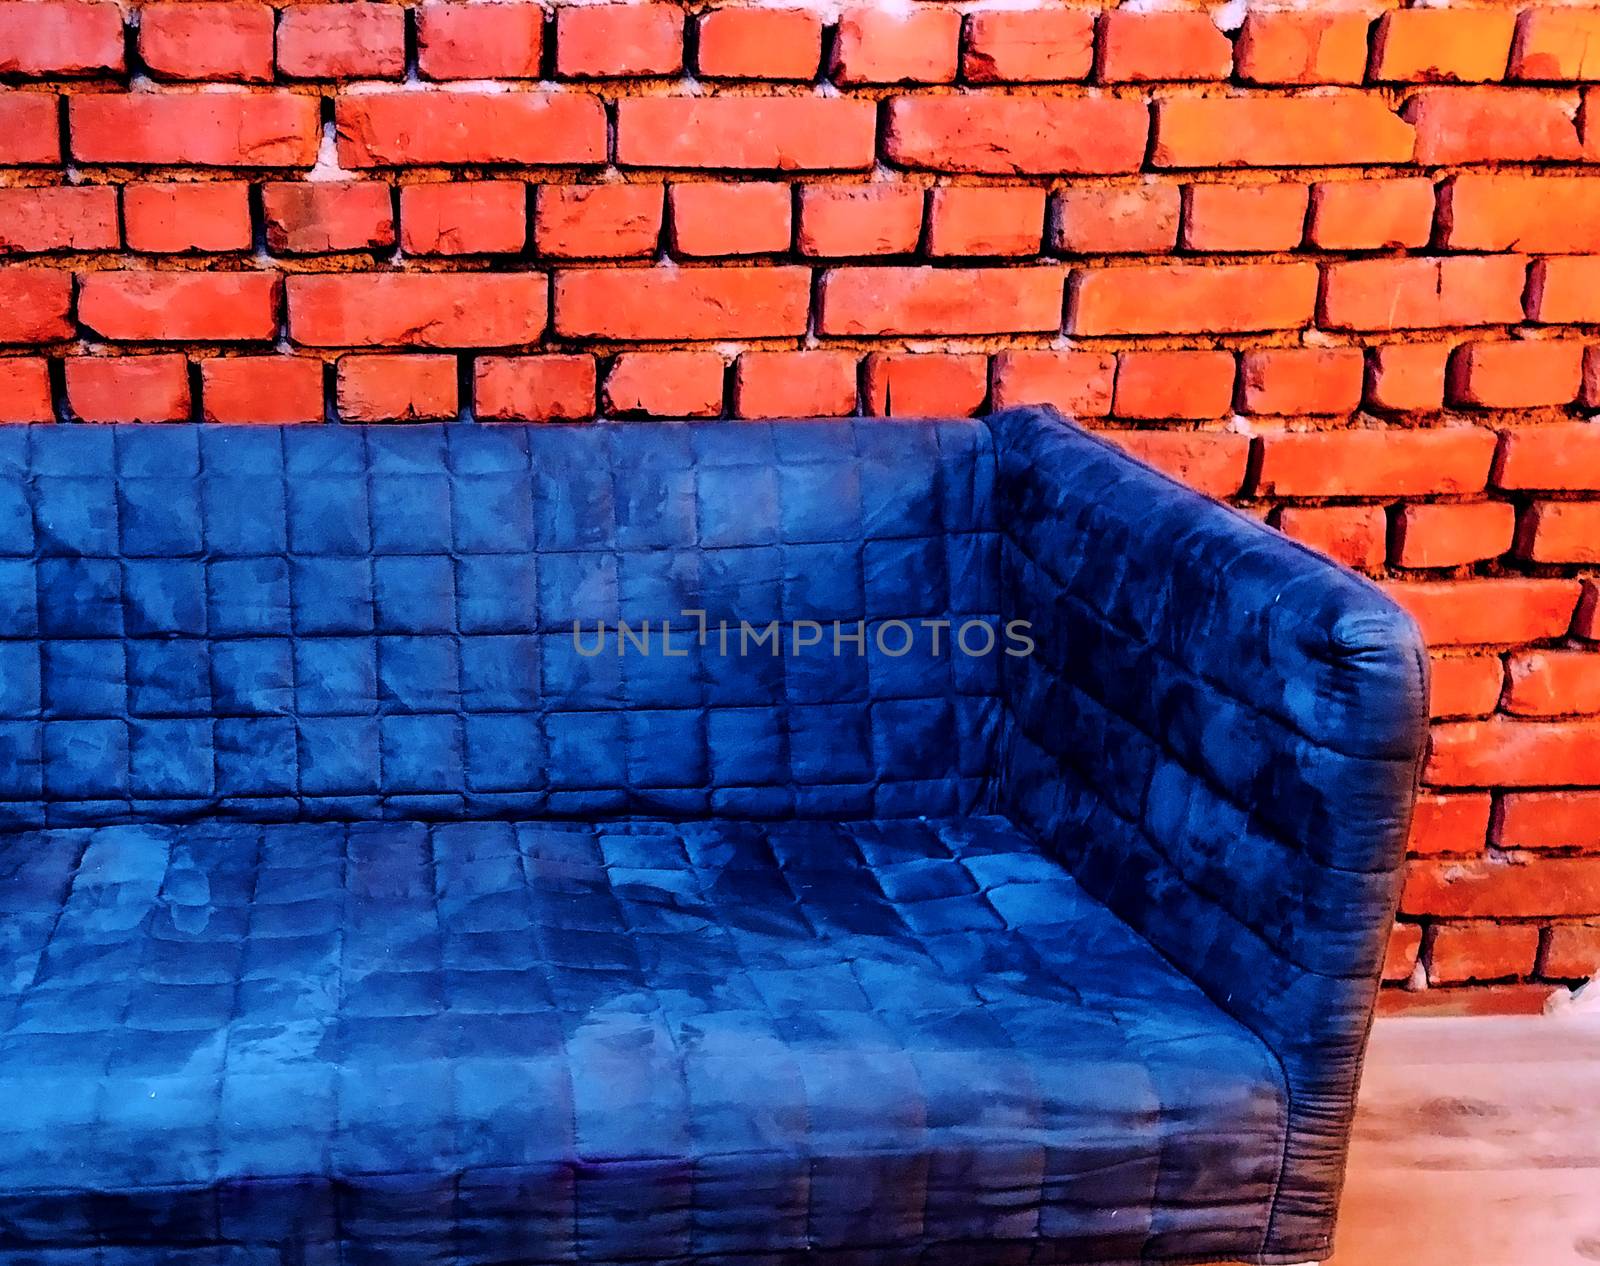 plush puff blue sofa on a brick backgrund vintage industrial style indoor concept by F1b0nacci